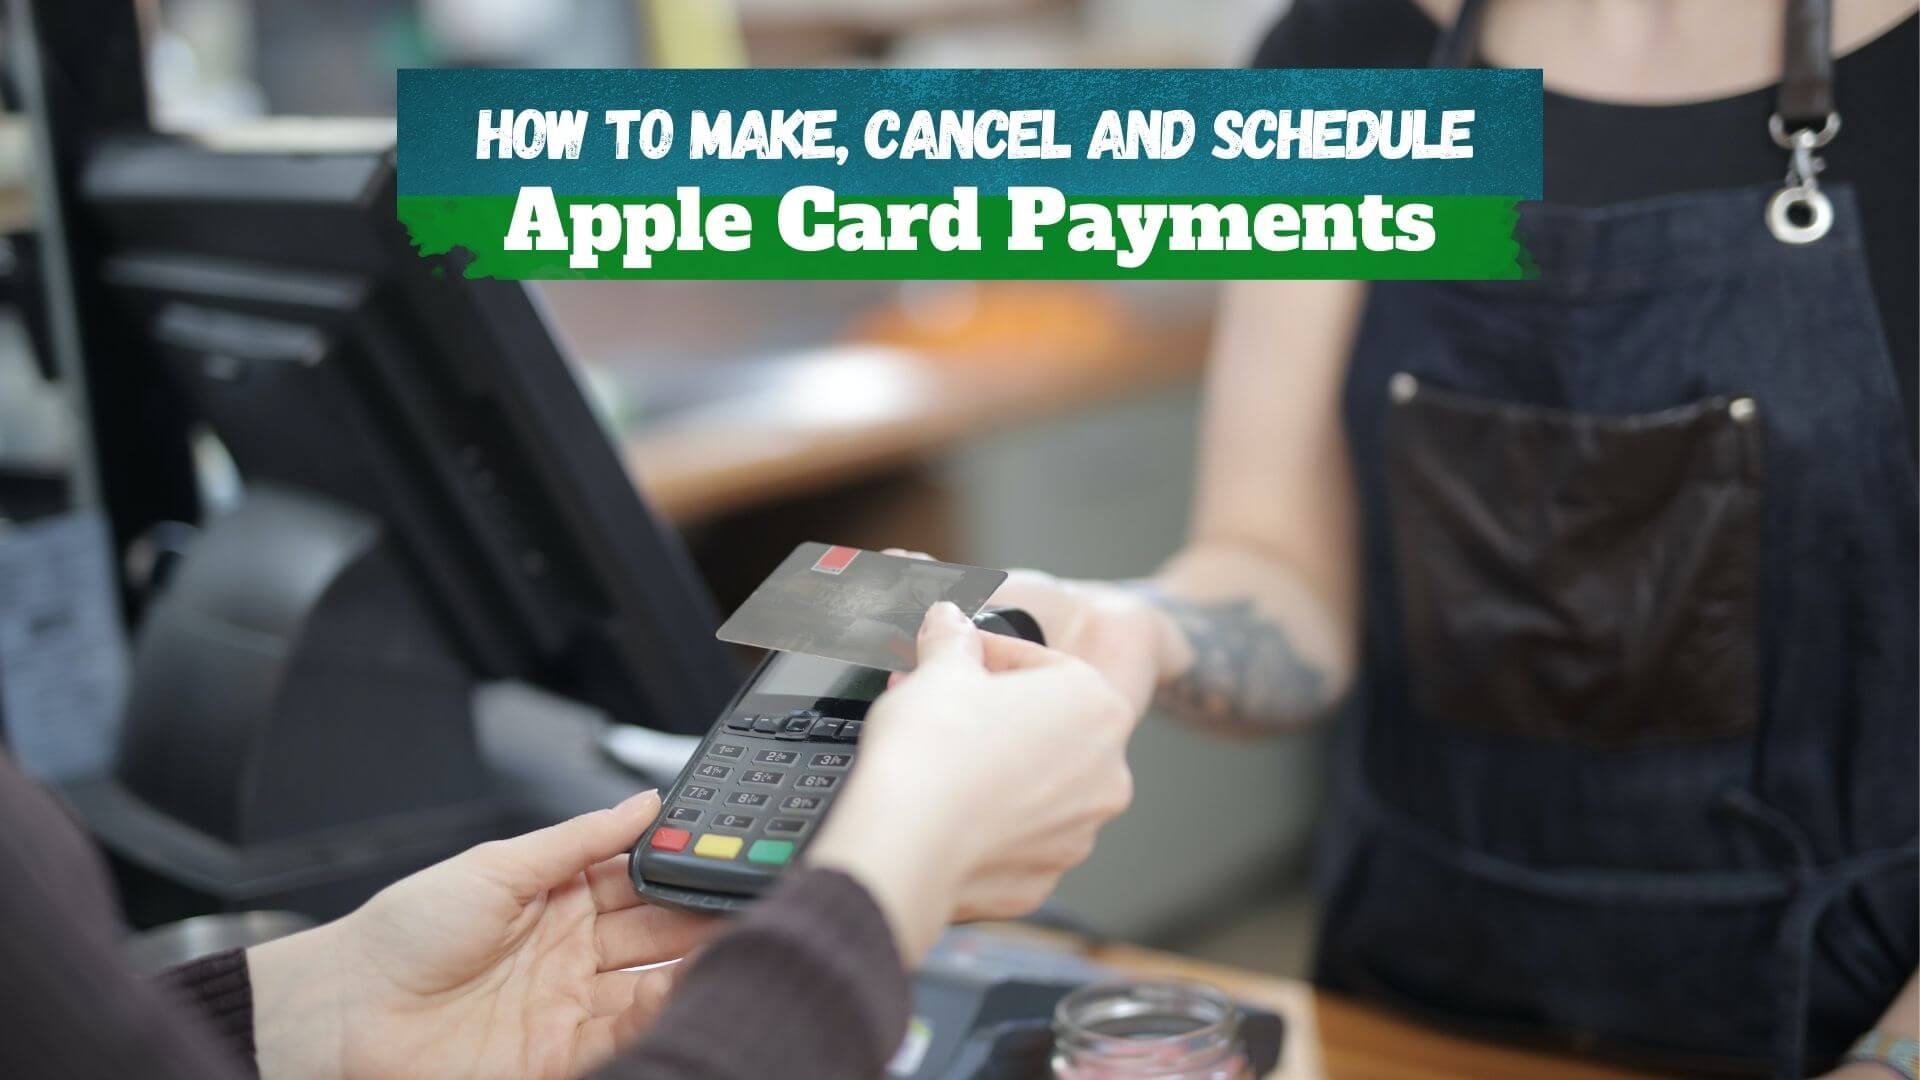 How exactly do you make, cancel, or schedule Apple Card payments? Here's all you need to know about making payments with your Apple Card.